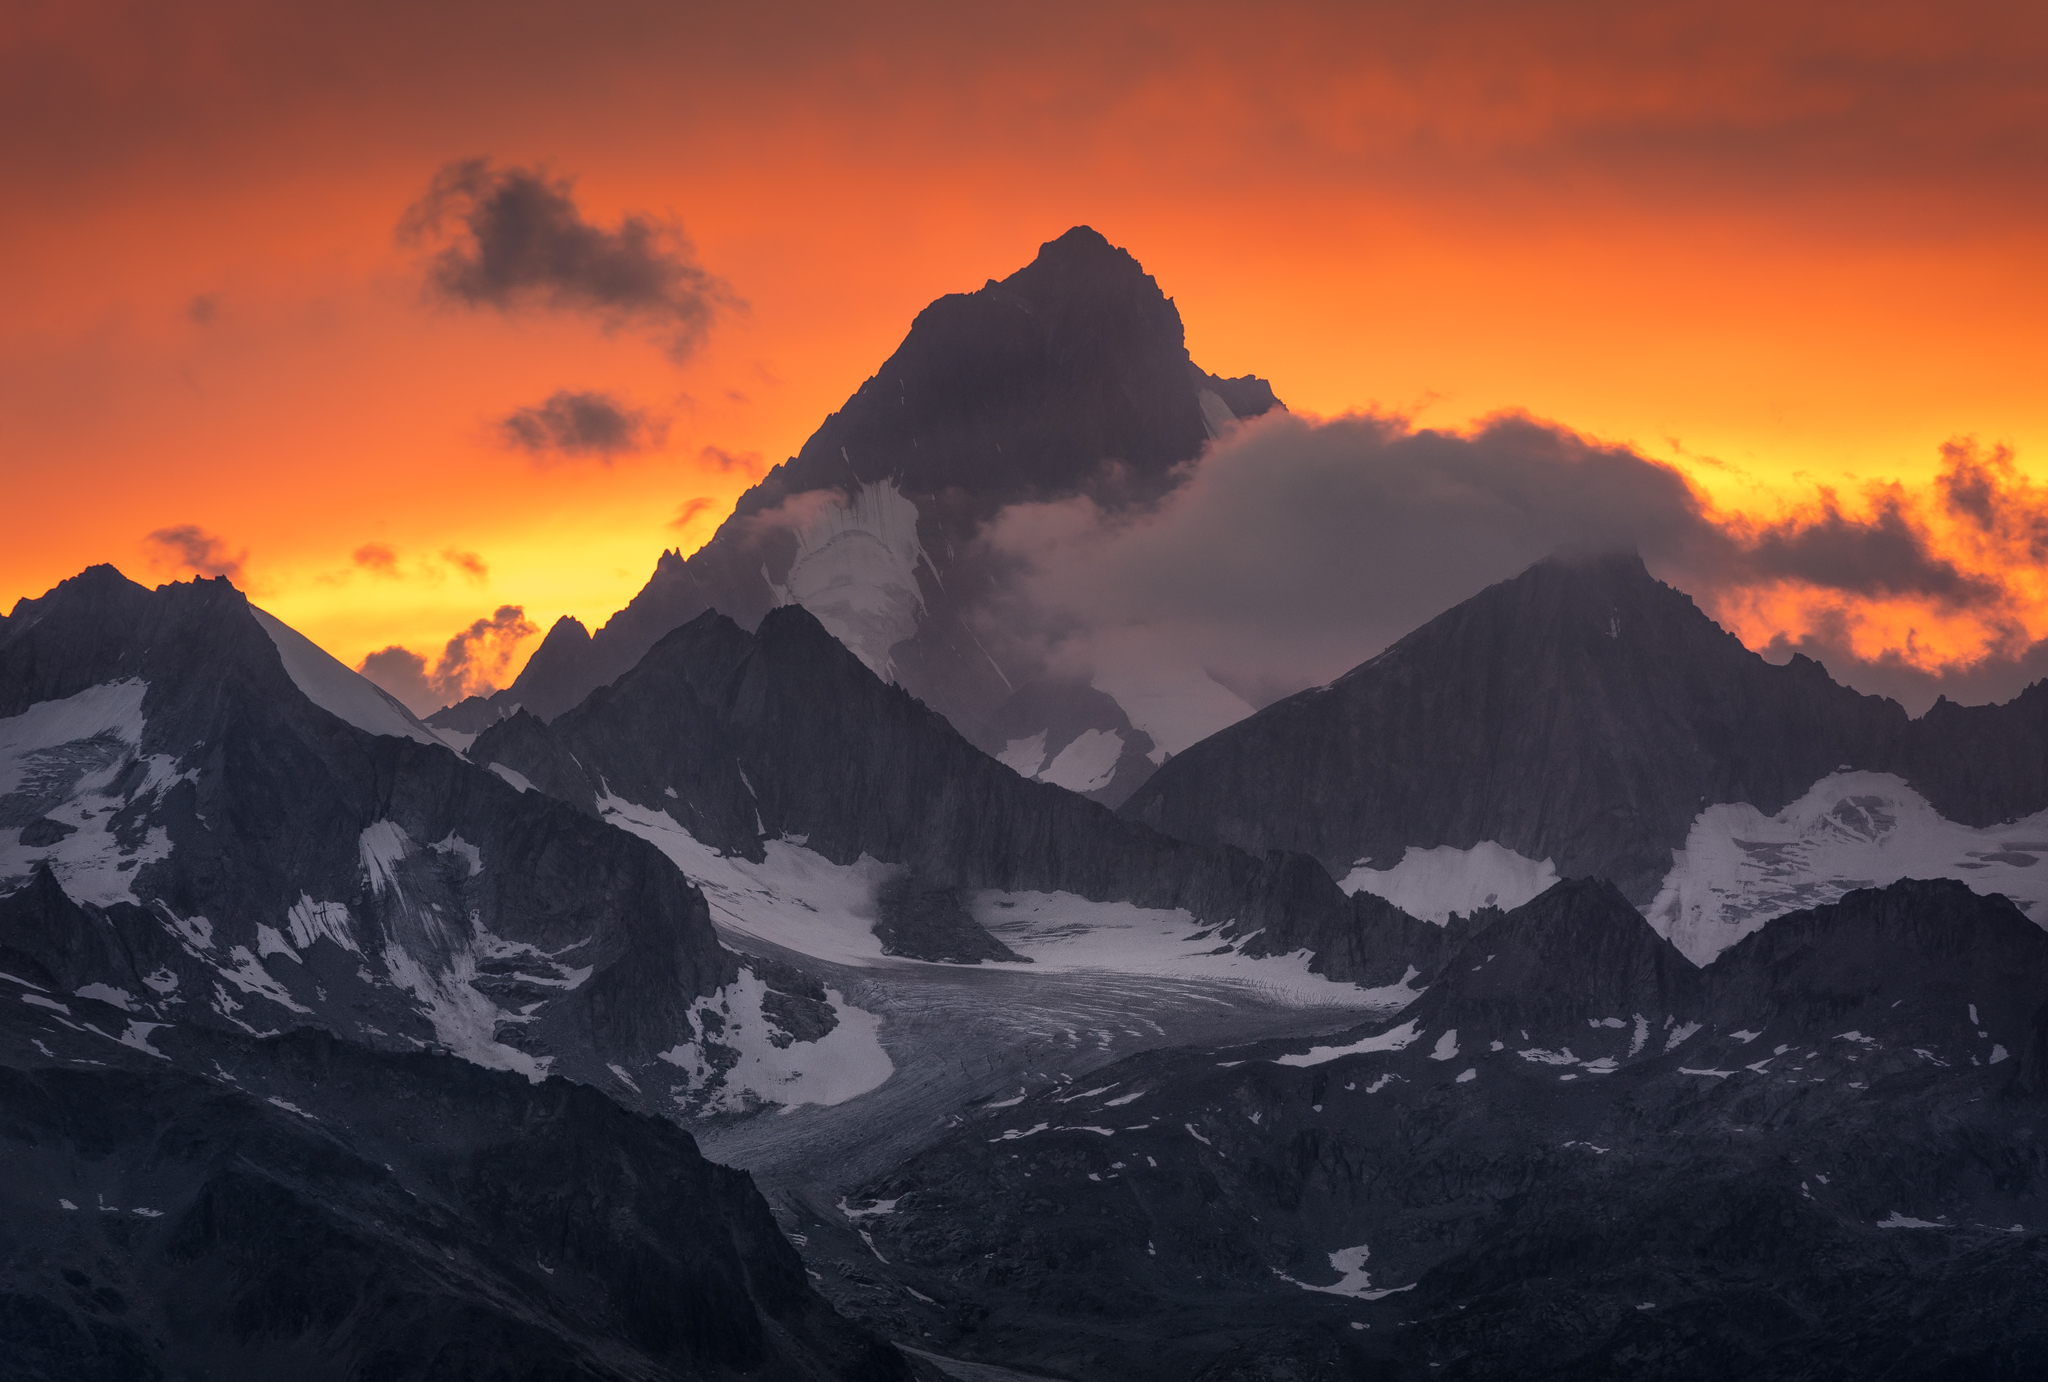 Bernese Alps at sunset...